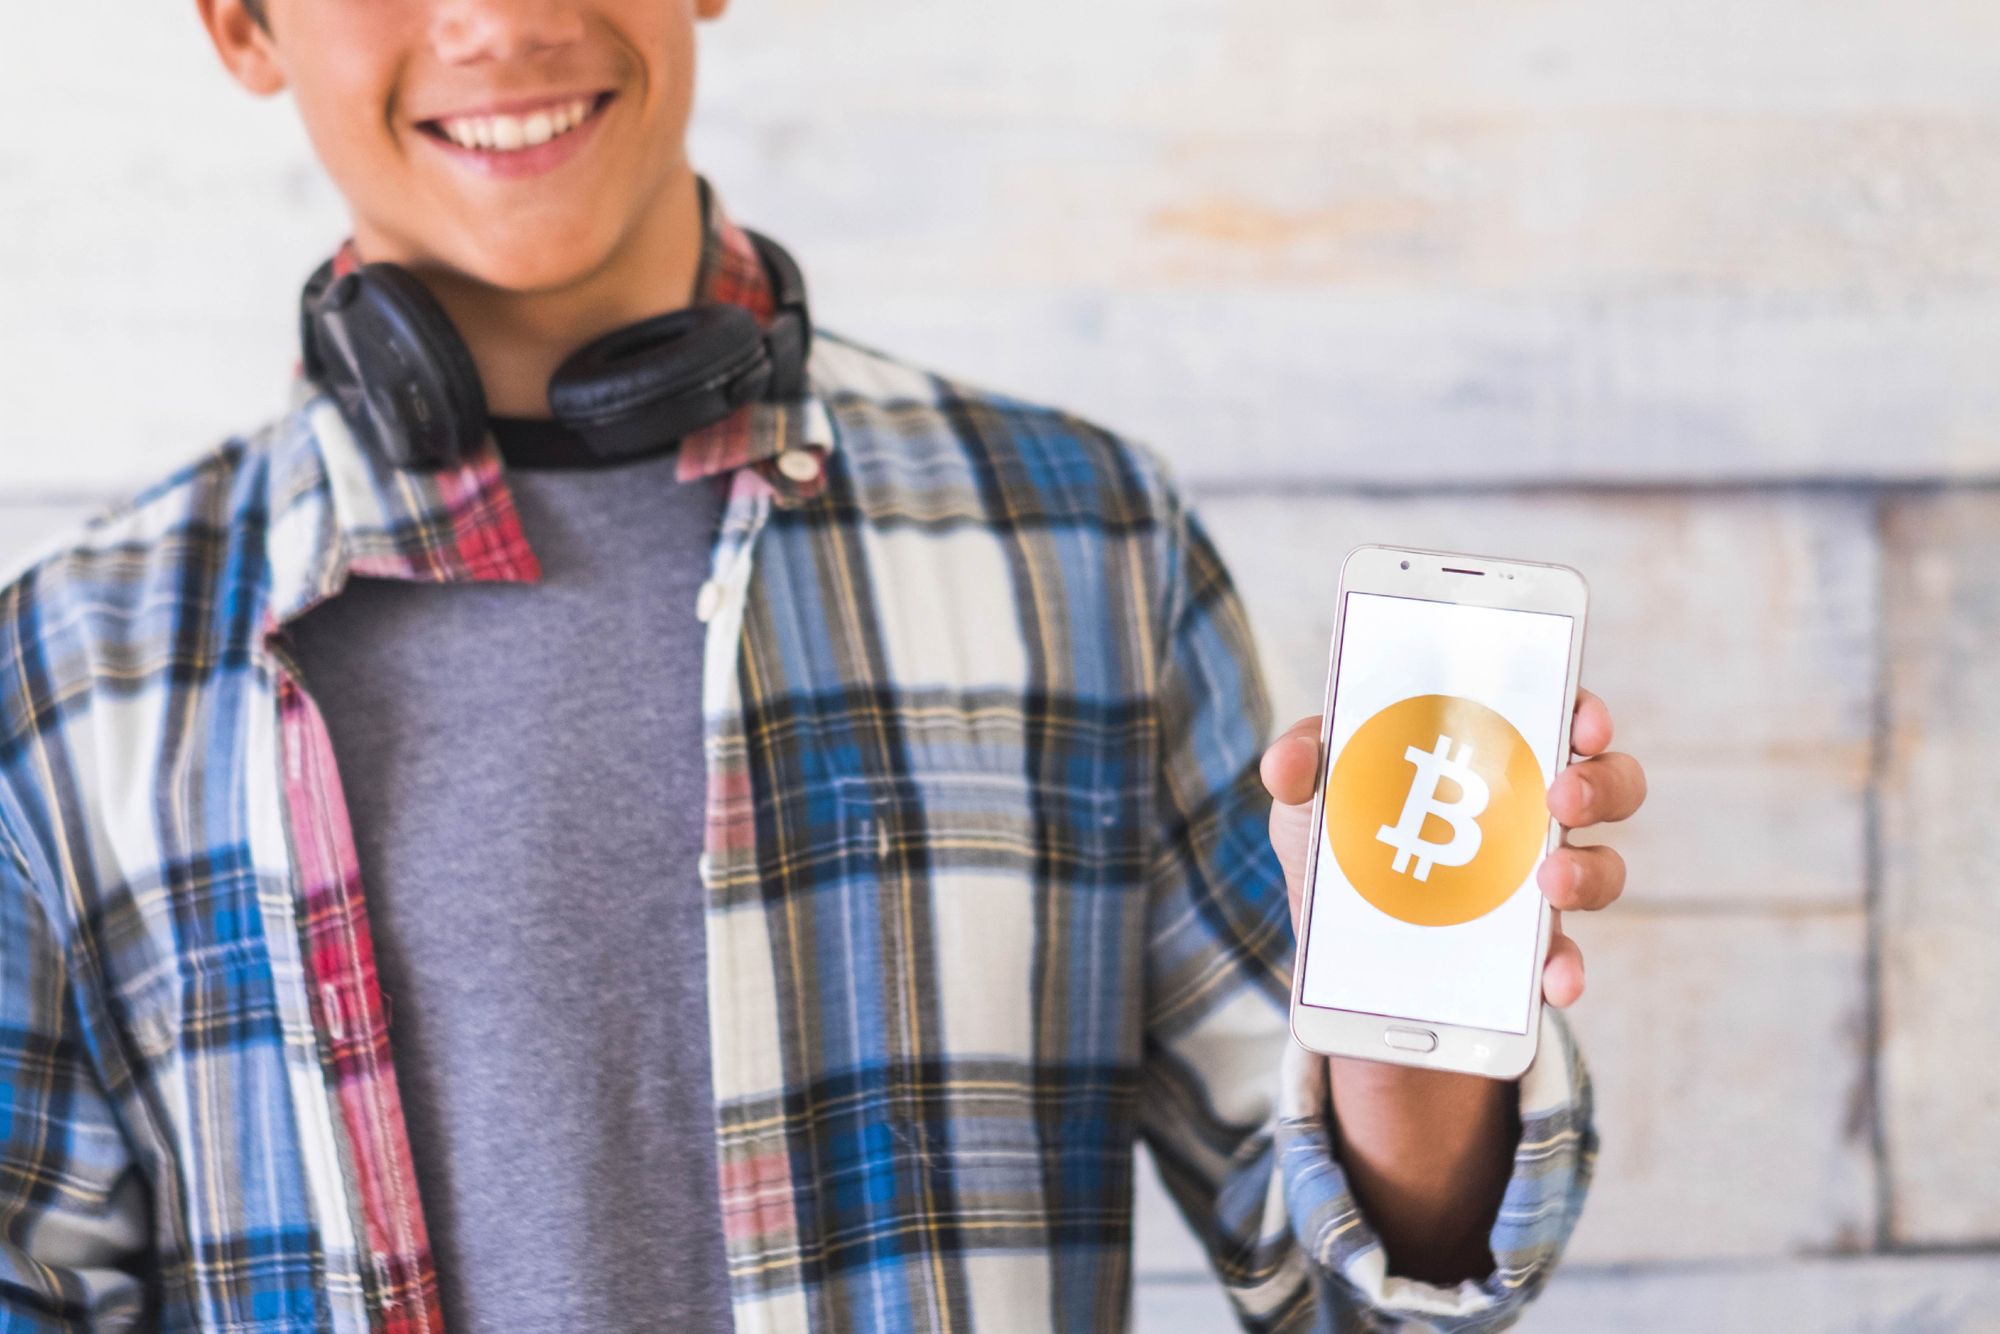 Crypto Wallets Are Among the Most Downloaded Apps on Google Play